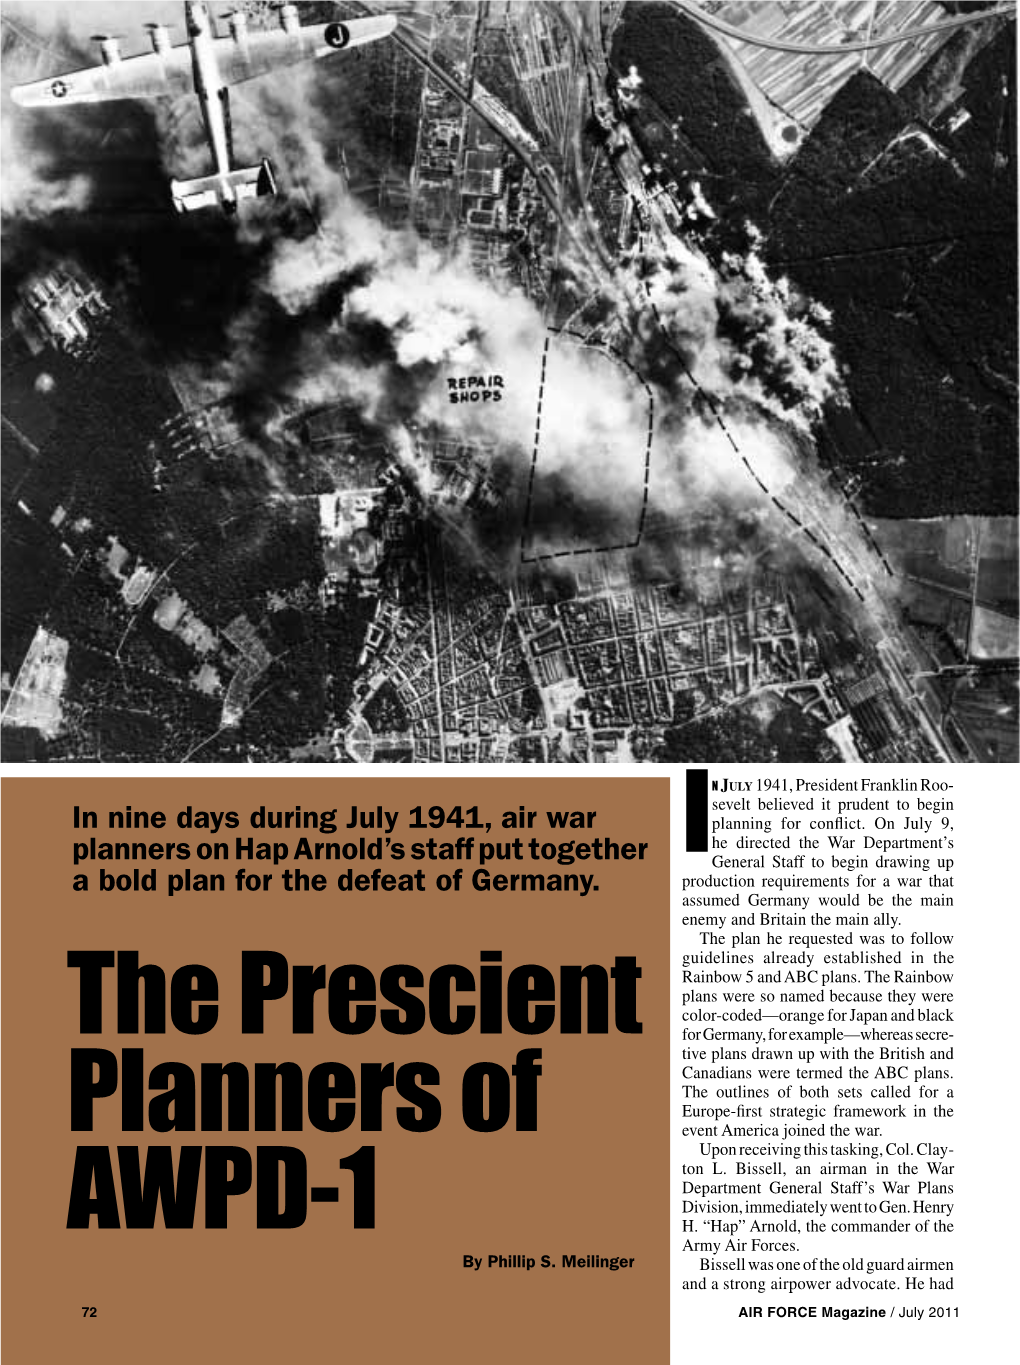 The Prescient Planners of AWPD-1 I